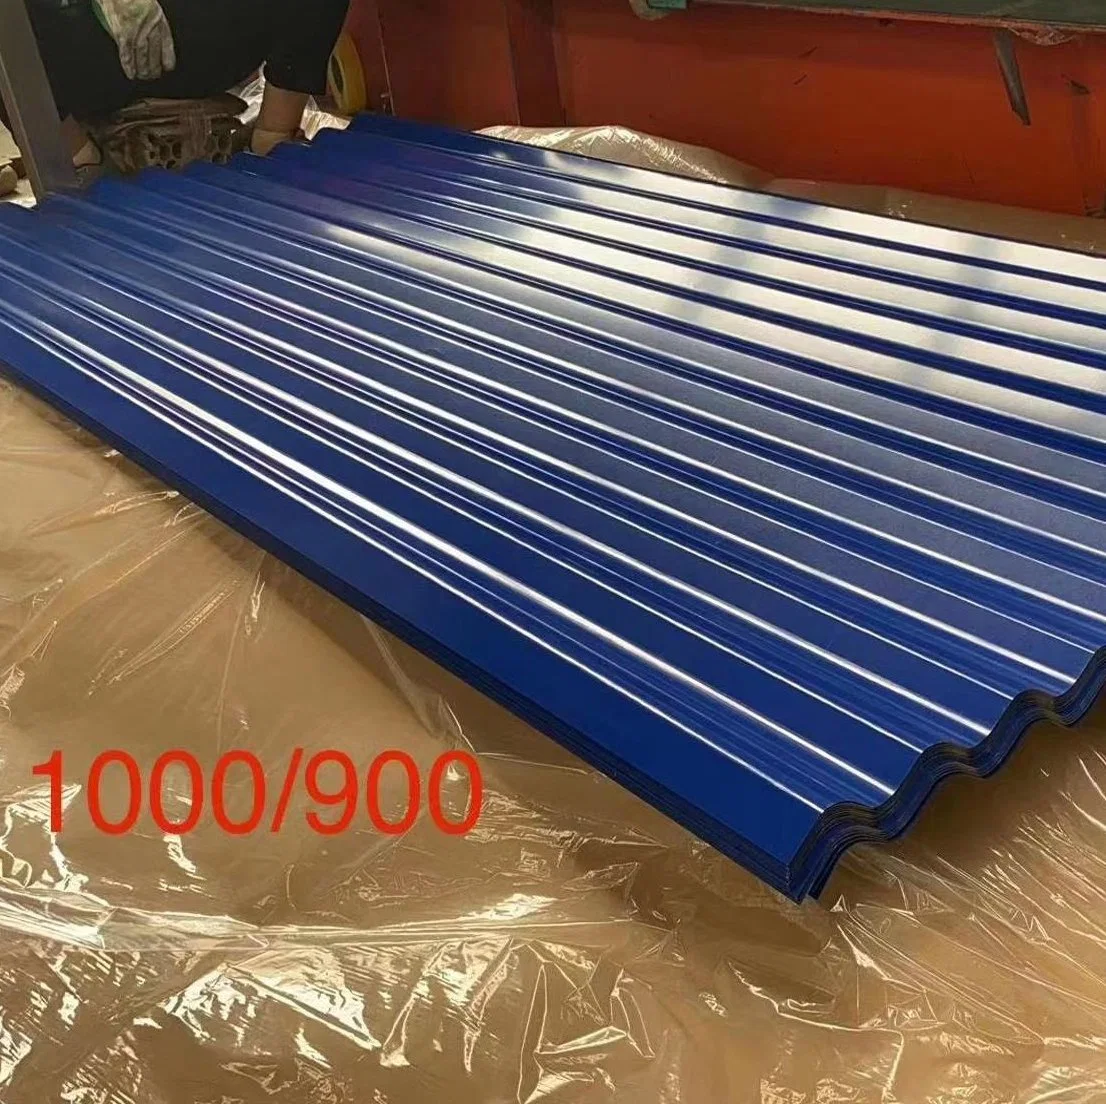 Price Quality Construction Materials Stone Coated Steel Rustproof Roofing Sheets